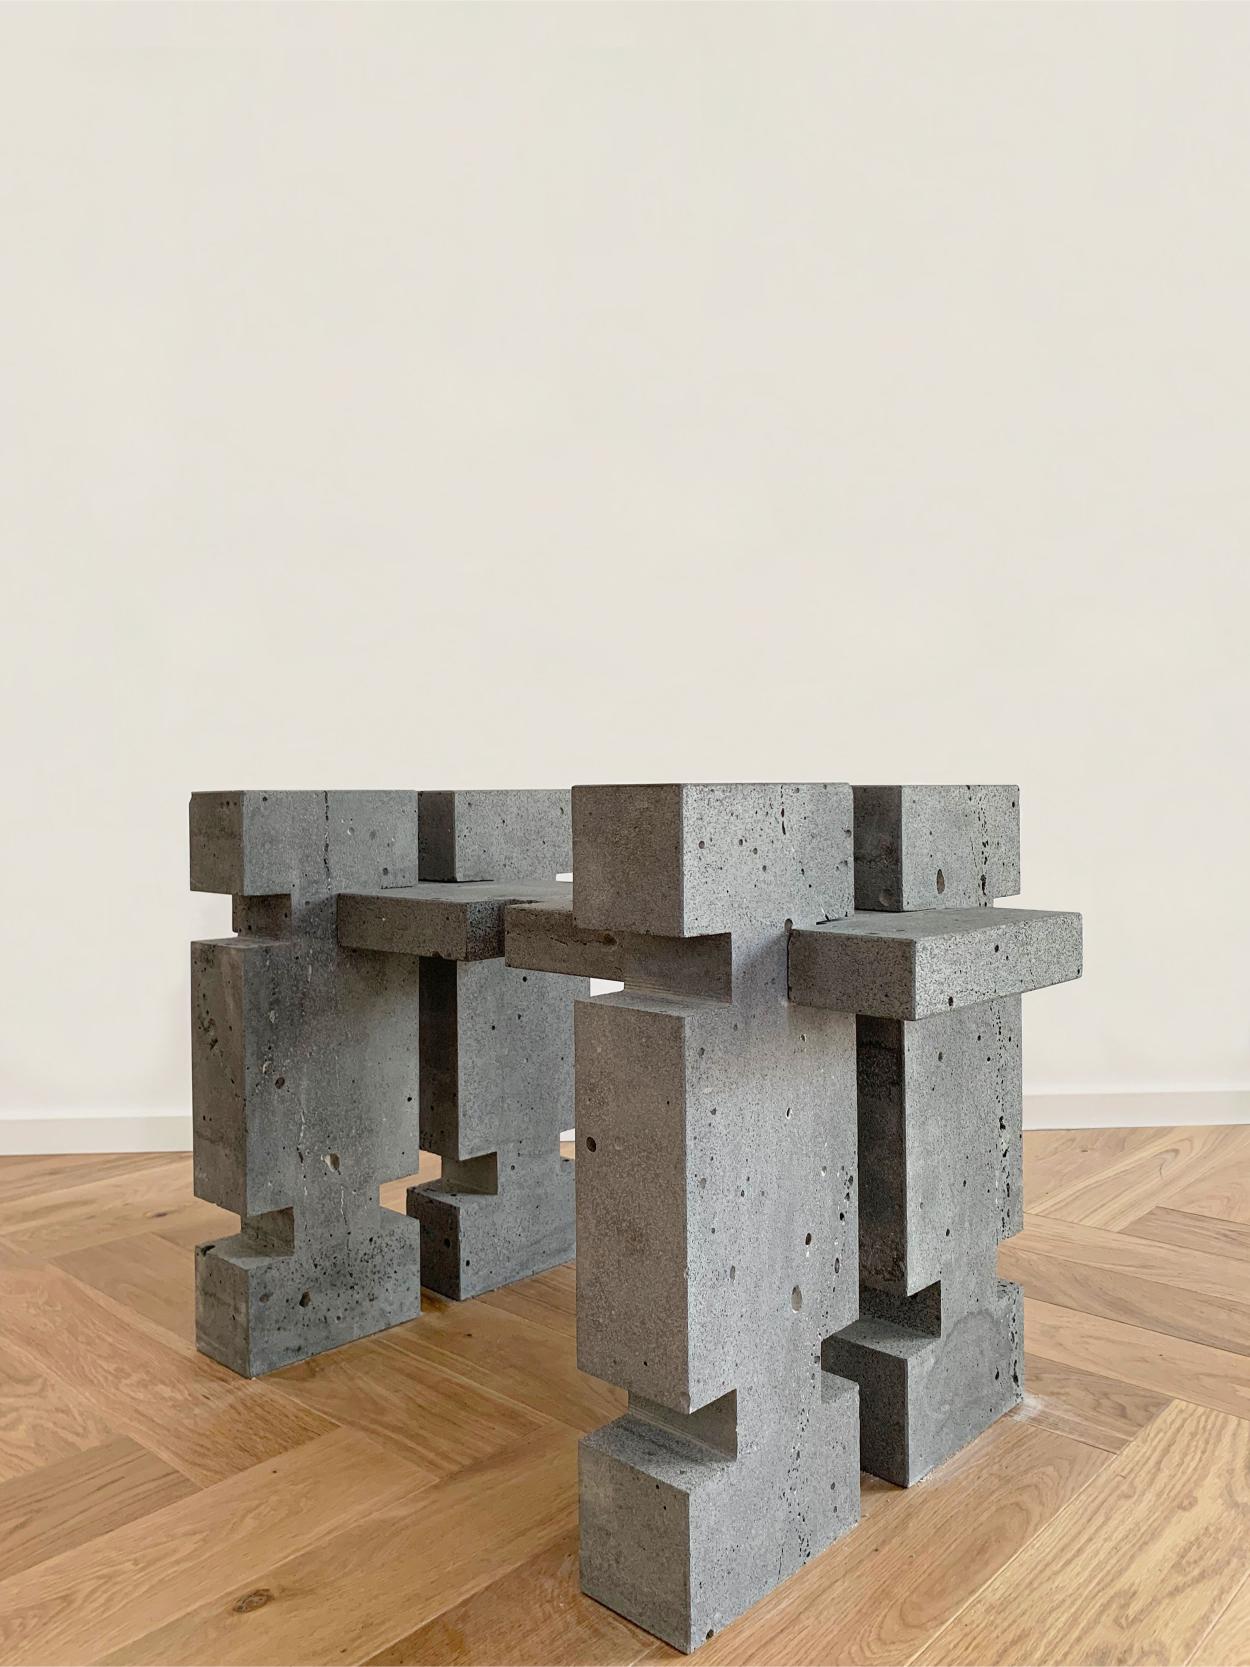 Element Basalt Bulk Stool by Nana Zaalishvili
Dimensions: W 85 x D 45 x H 55 cm
Materials: basalt

‘Element’, which combines furniture of different functions, was created under the influence of the Georgian Oda house and the 'construction element'